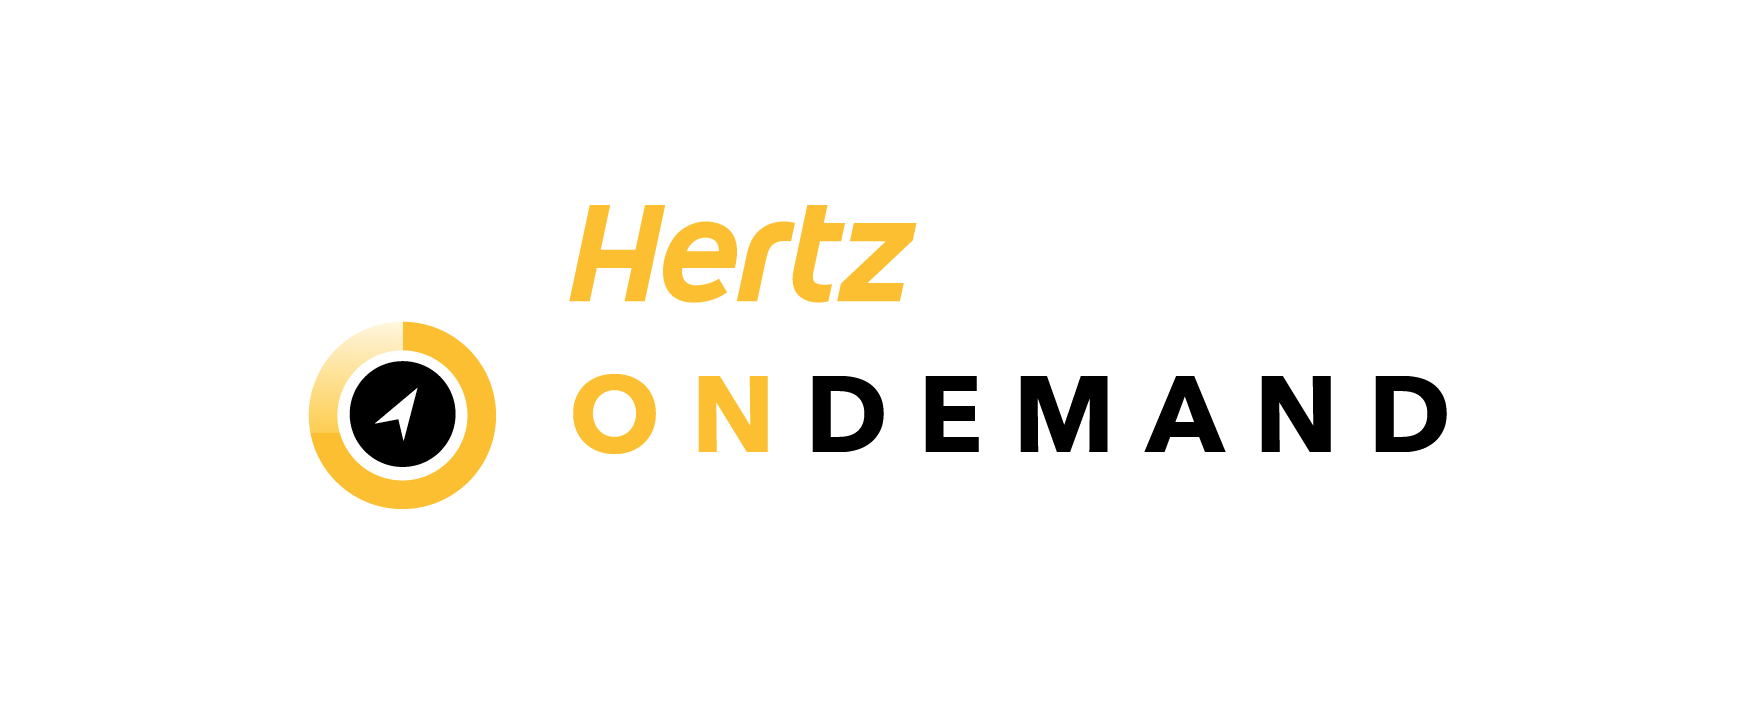 On Demand logo.png